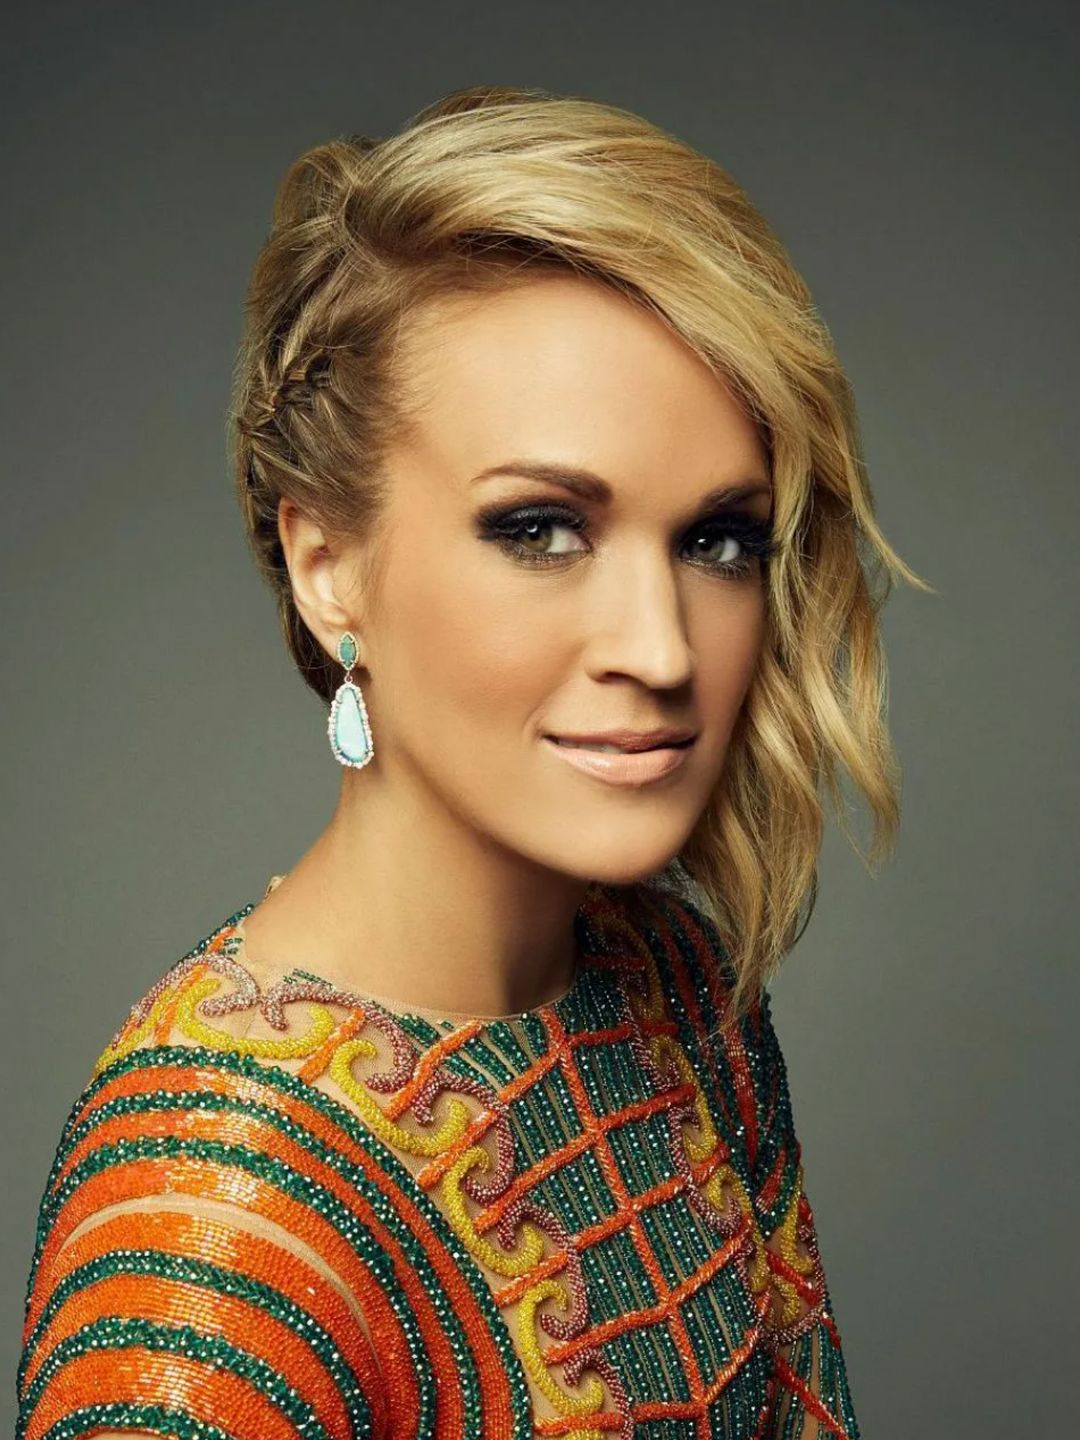 Carrie Underwood where did she study